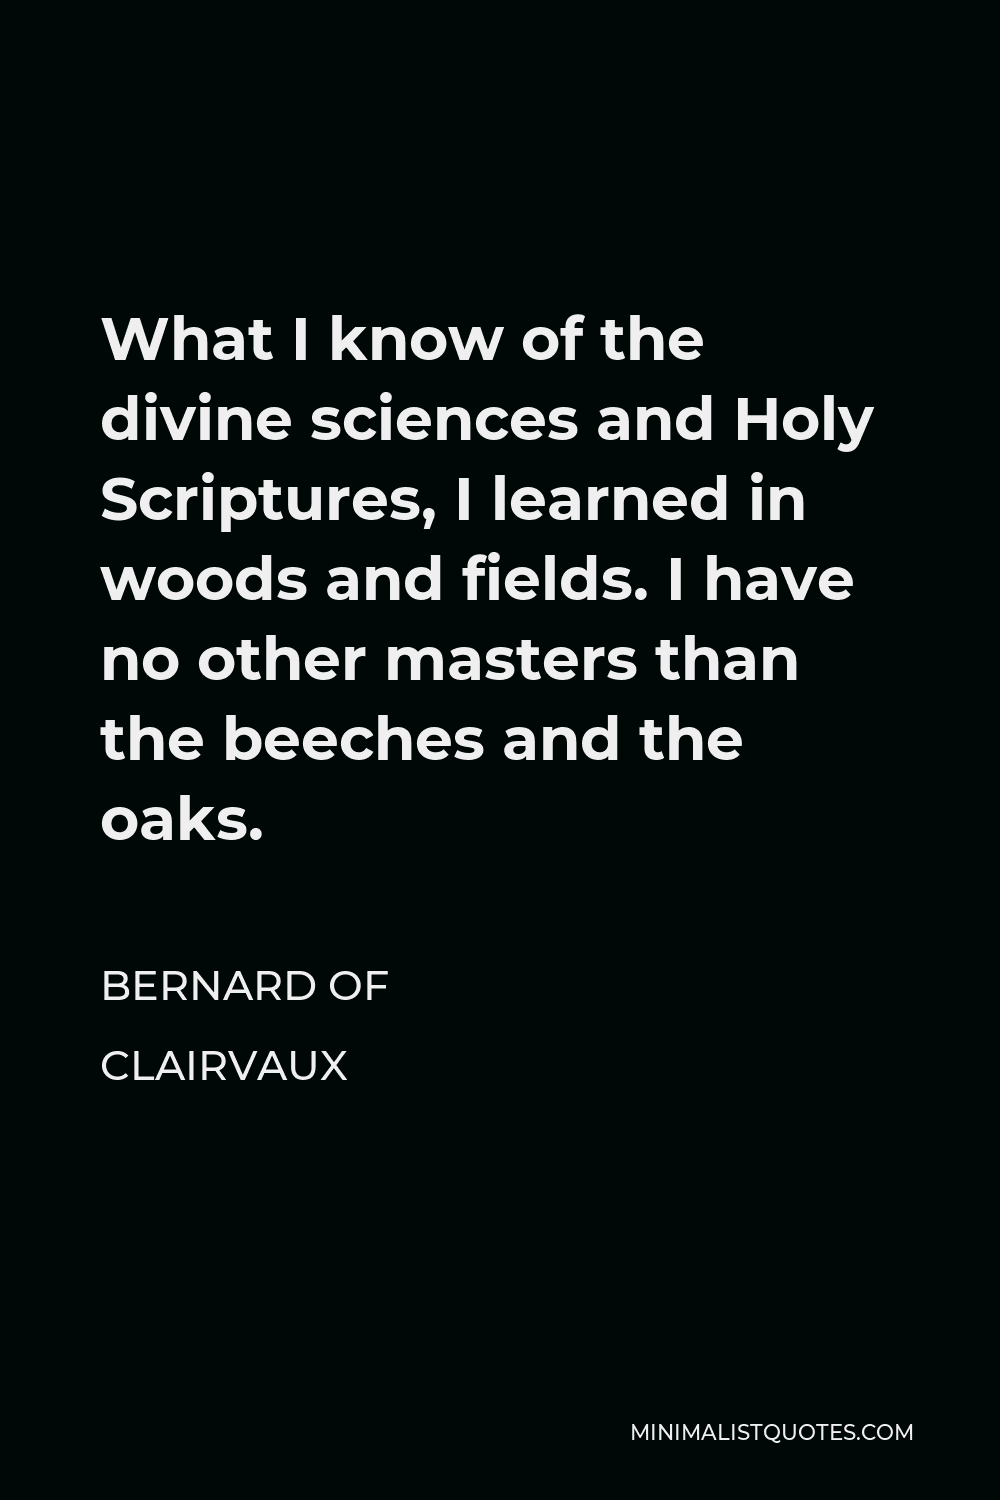 Bernard of Clairvaux Quote - What I know of the divine sciences and Holy Scriptures, I learned in woods and fields. I have no other masters than the beeches and the oaks.